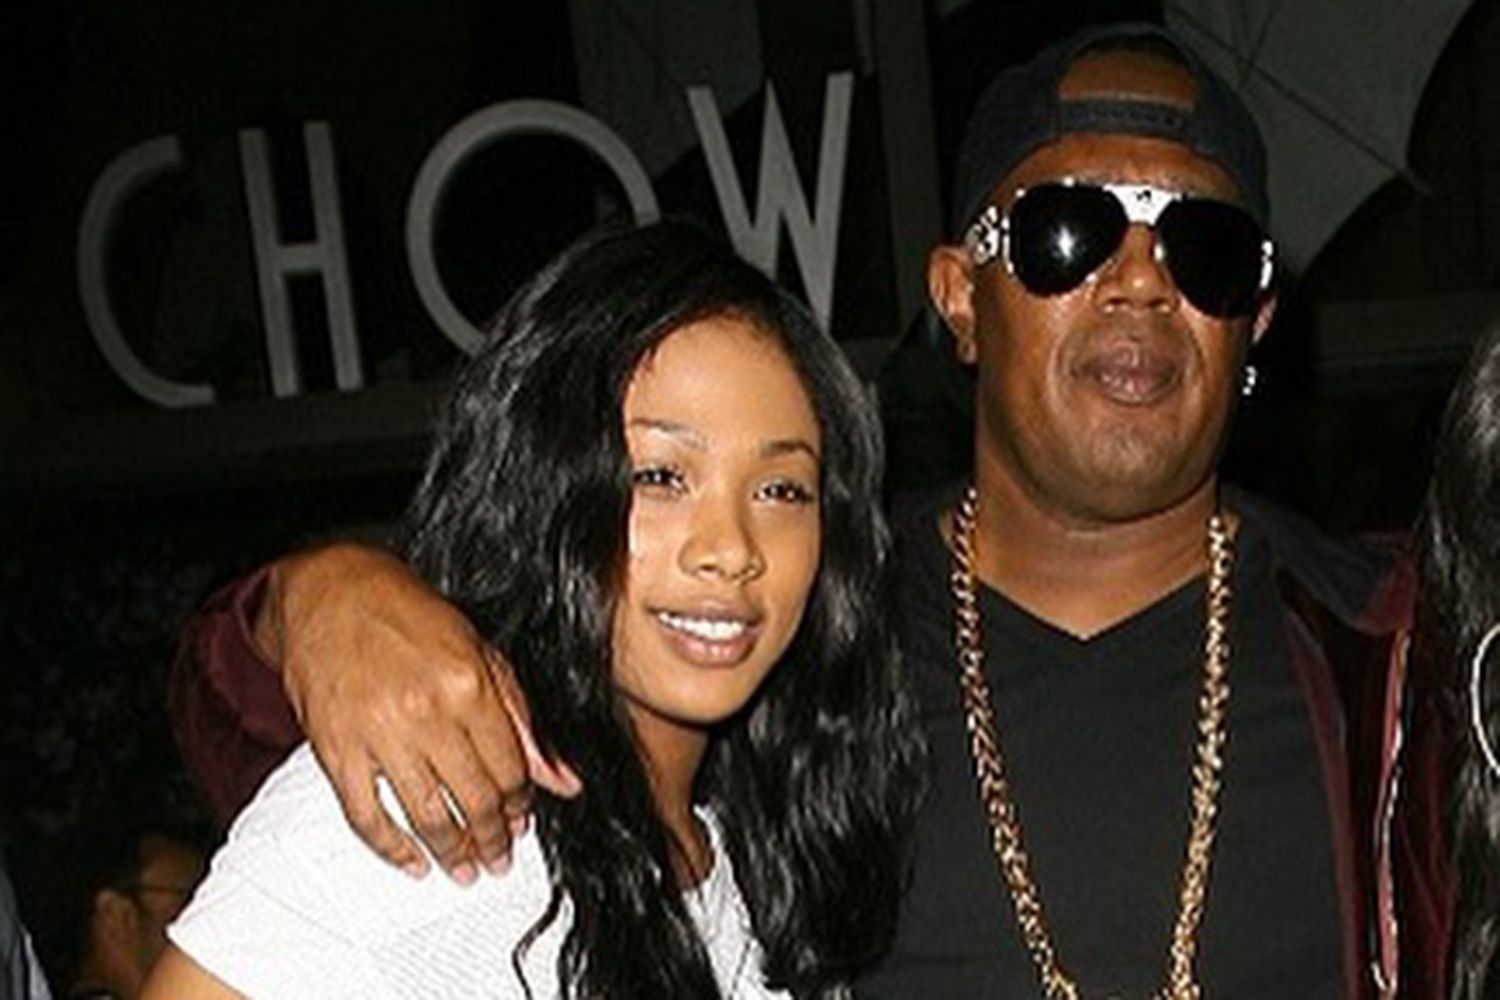 WATCH: Master P Opens Up About His Daughter Tytyana Miller’s ‘Heartbreaking’ Fatal Drug Overdose